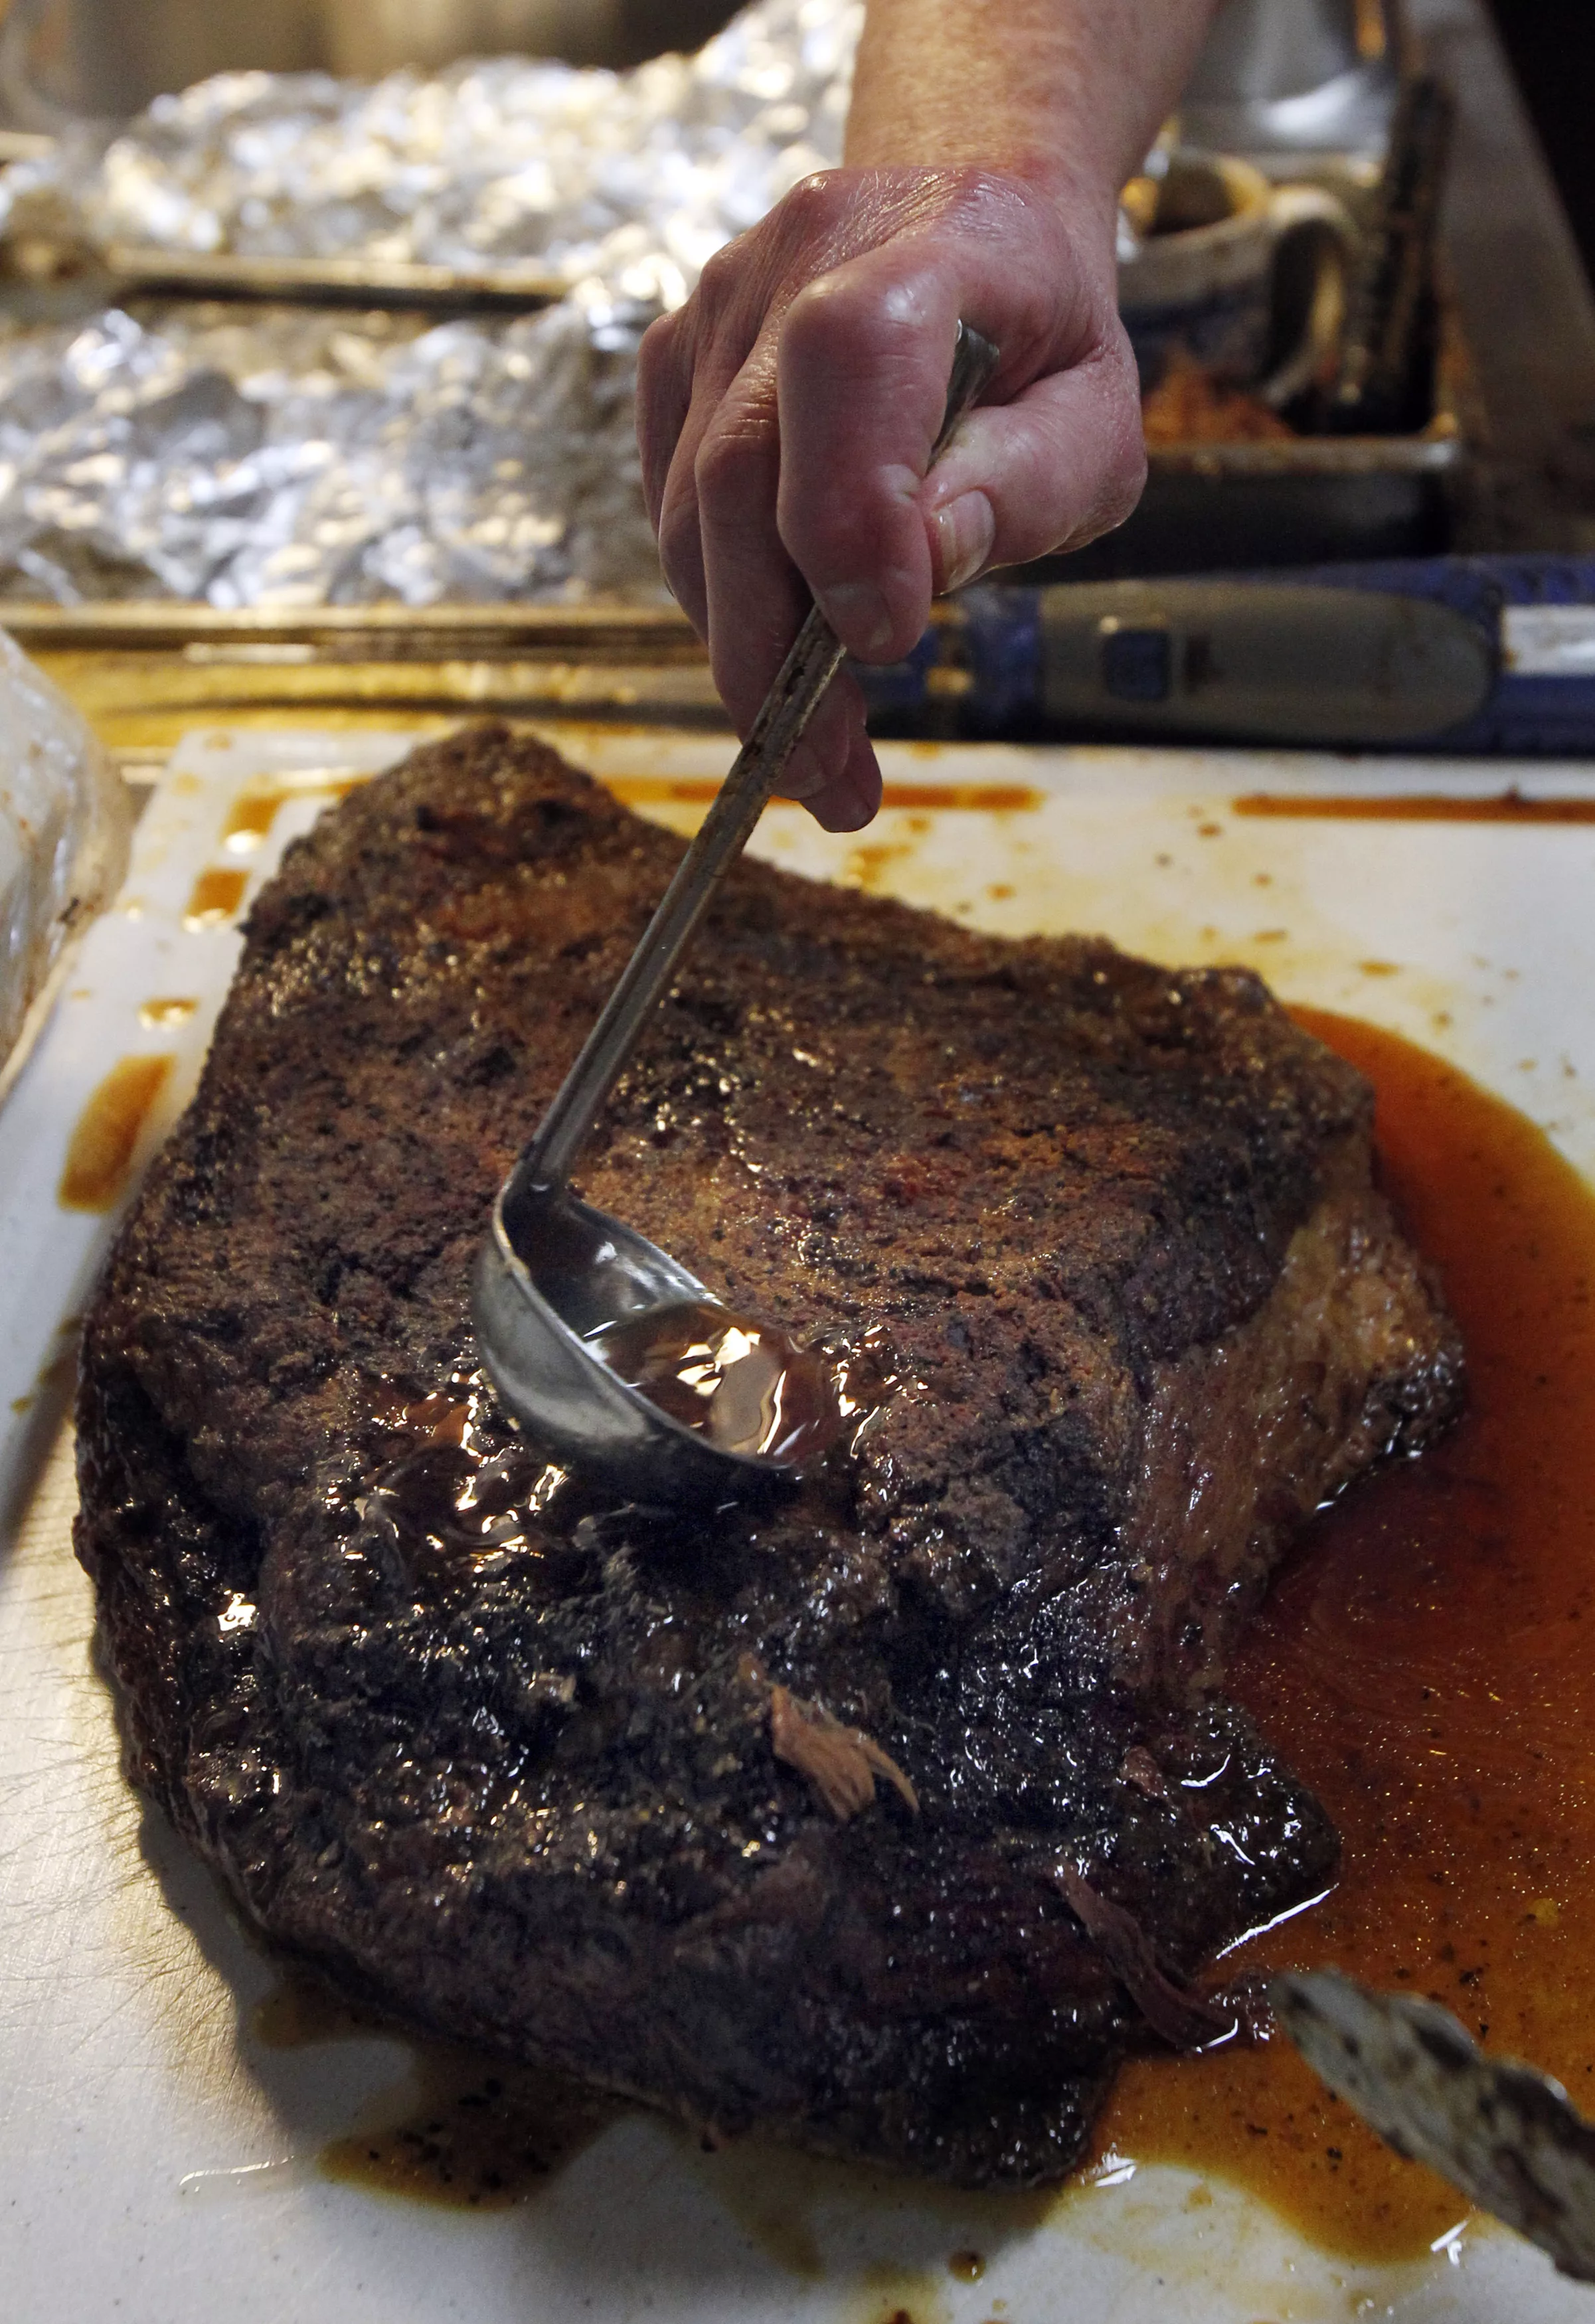 leon-uses-a-ladle-to-brisket-juice-on-a-beef-brisket-fresh-off-the-smoker-at-big-boys-bar-b-que-in-sweetwater-2